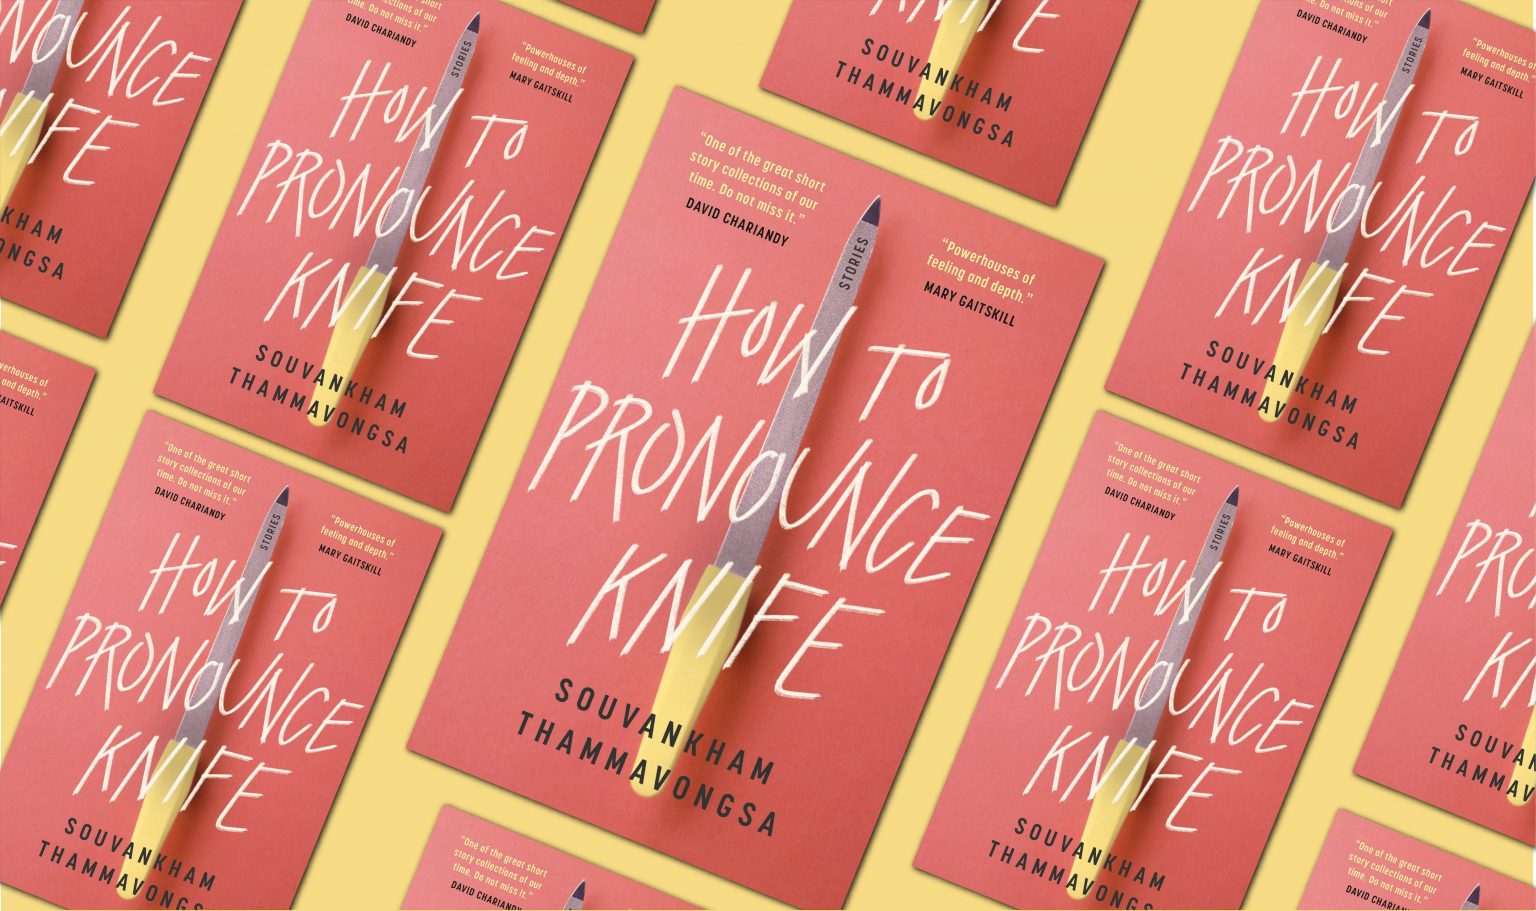 how to pronounce knife book review